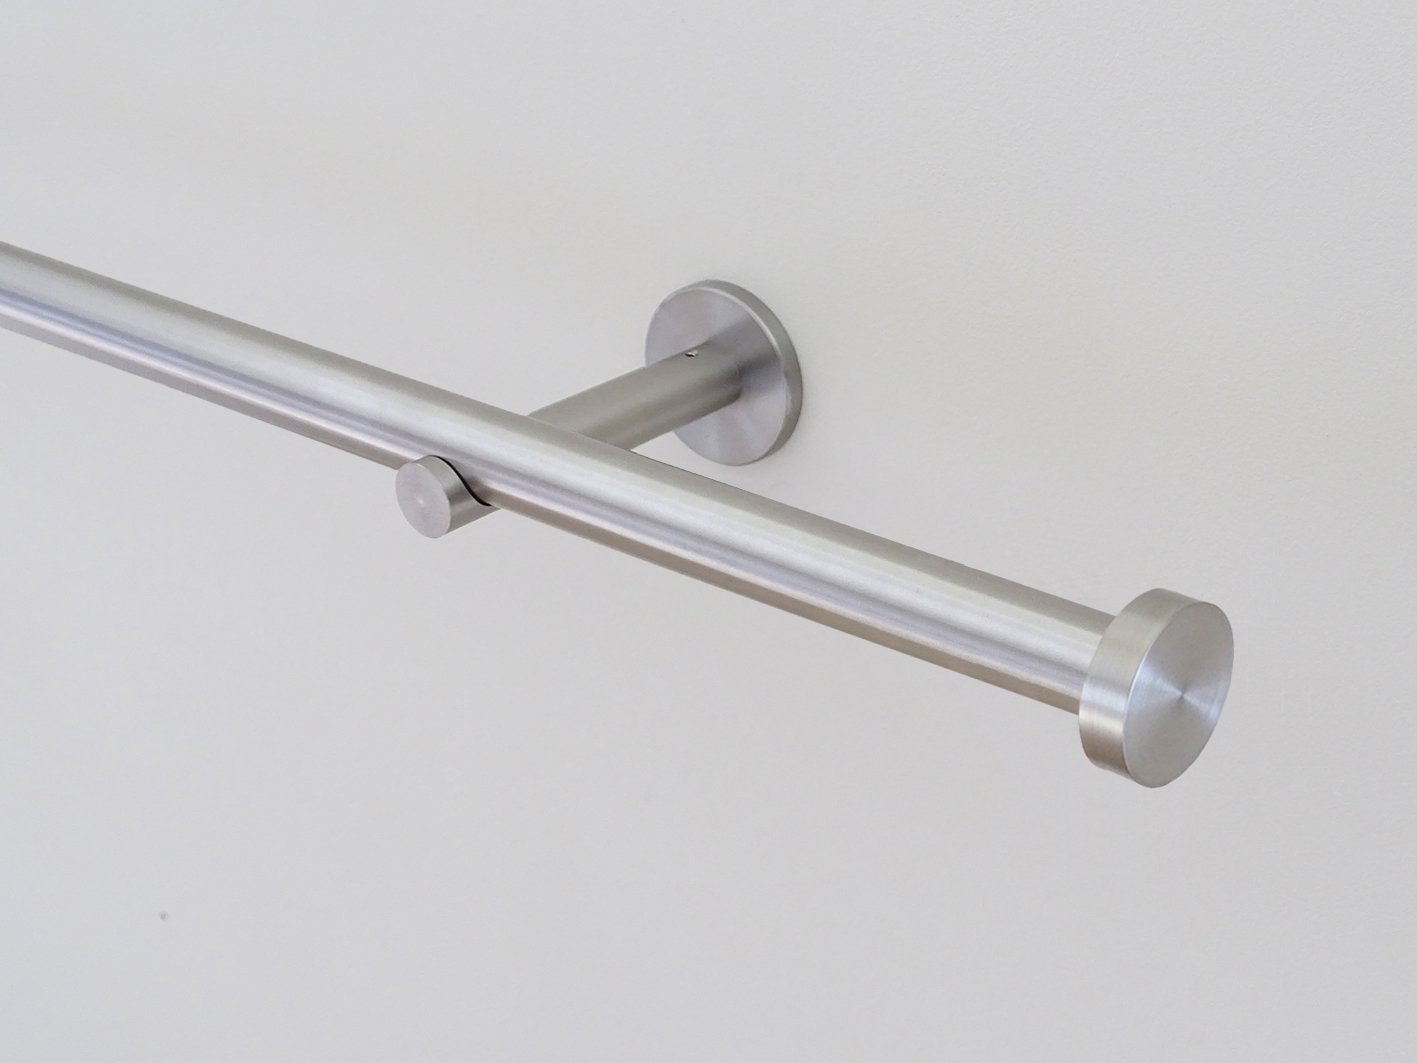 19mm stainless steel curtain pole set with mini disc finials